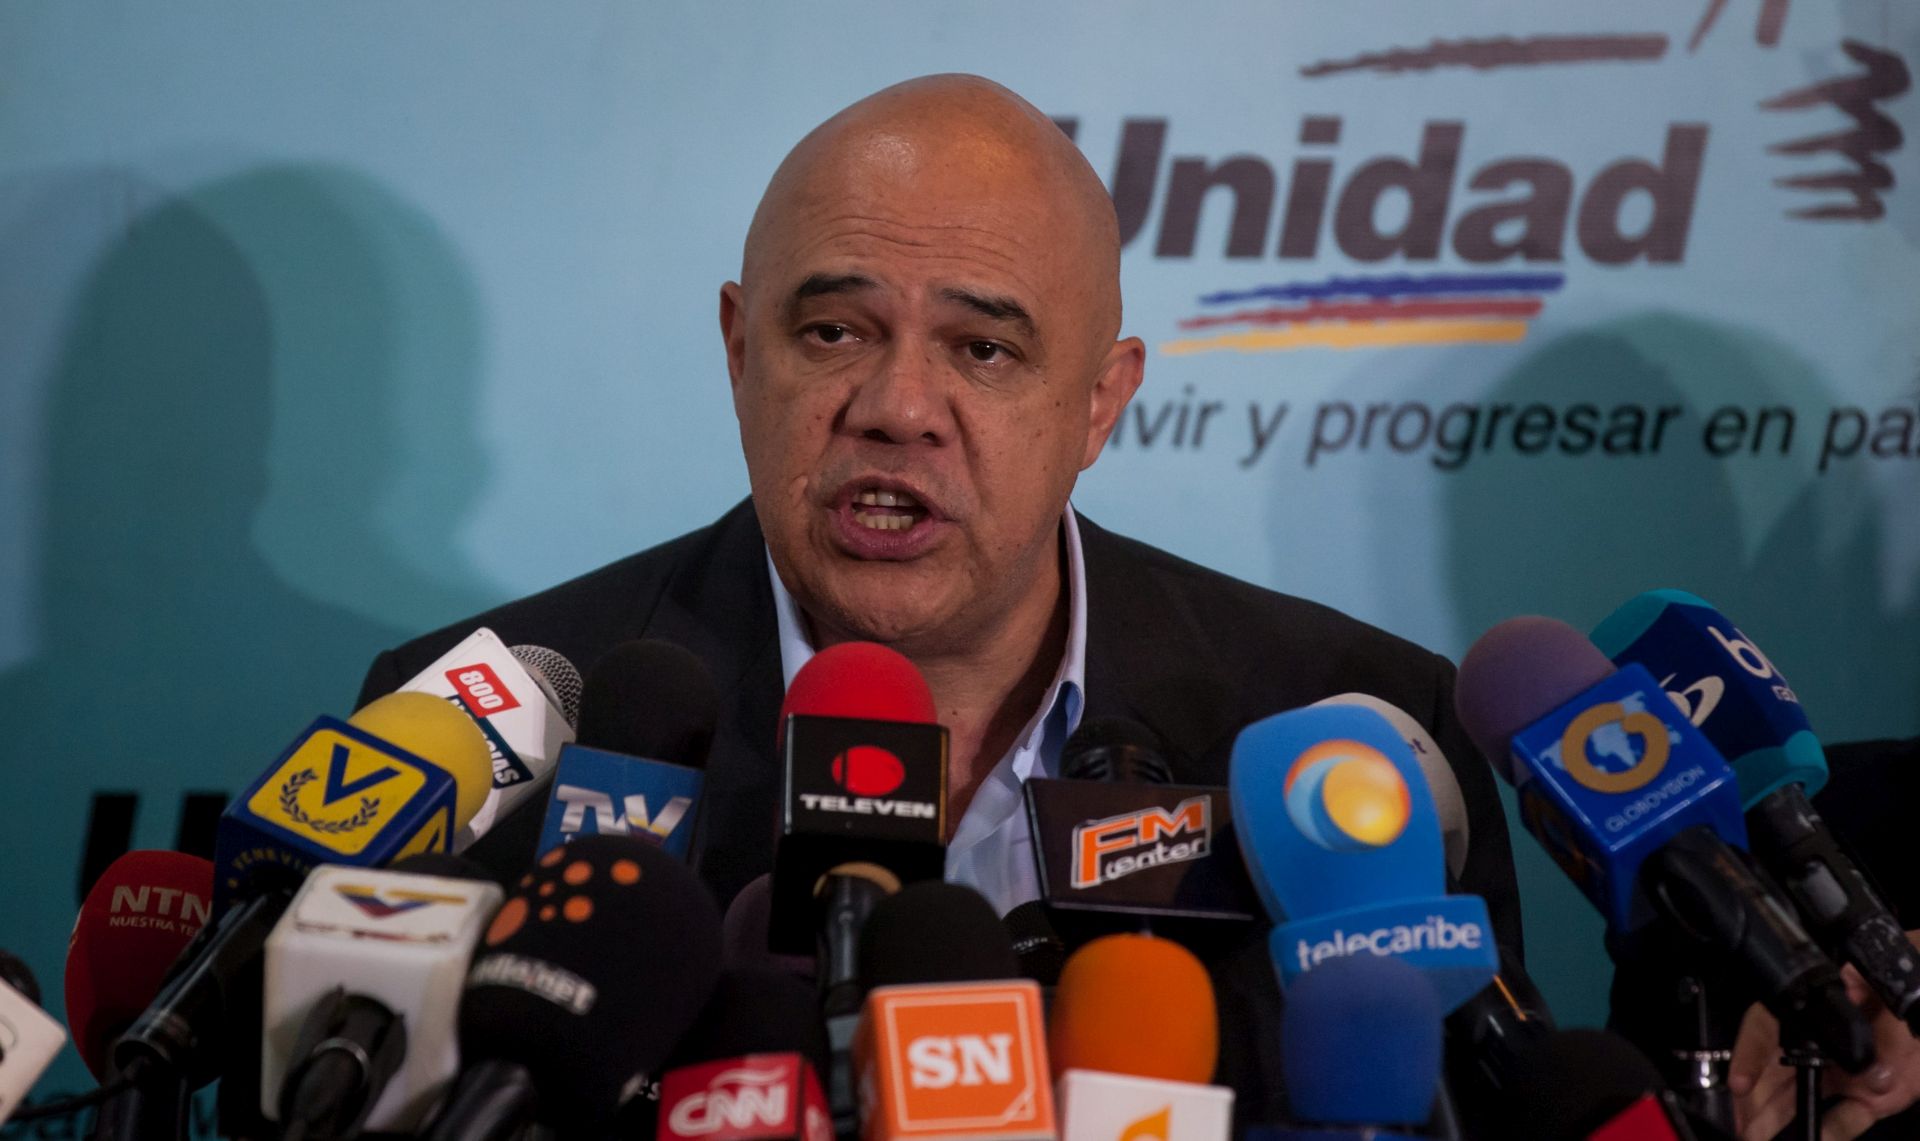 epa05343046 Secretary-General of the Democratic Unity Roundtable (known by the Spanish acronym MUD) opposition coalition Jesus Torrealba speaks during a press conference in Caracas, Venezuela, 02 June 2016. According to media reports, Torrealba encouraged Venezuelan citizens who want a referendum to recall President Nicolas Maduro to 'ratify their signatures' by joining nationwide protest scheduled for 06 June. Venezuela is in the midst of political deadlock with opponents of President Nicolas Maduro calling for his resignation as the Venezuelan economy stagnates, causing dramatic price increases on basic goods across the country. On 02 June, at least 19 journalist were assaulted in downtown Caracas while covering demonstrations organized to protest the increasing cost of basic goods.  EPA/MIGUEL GUTIERREZ